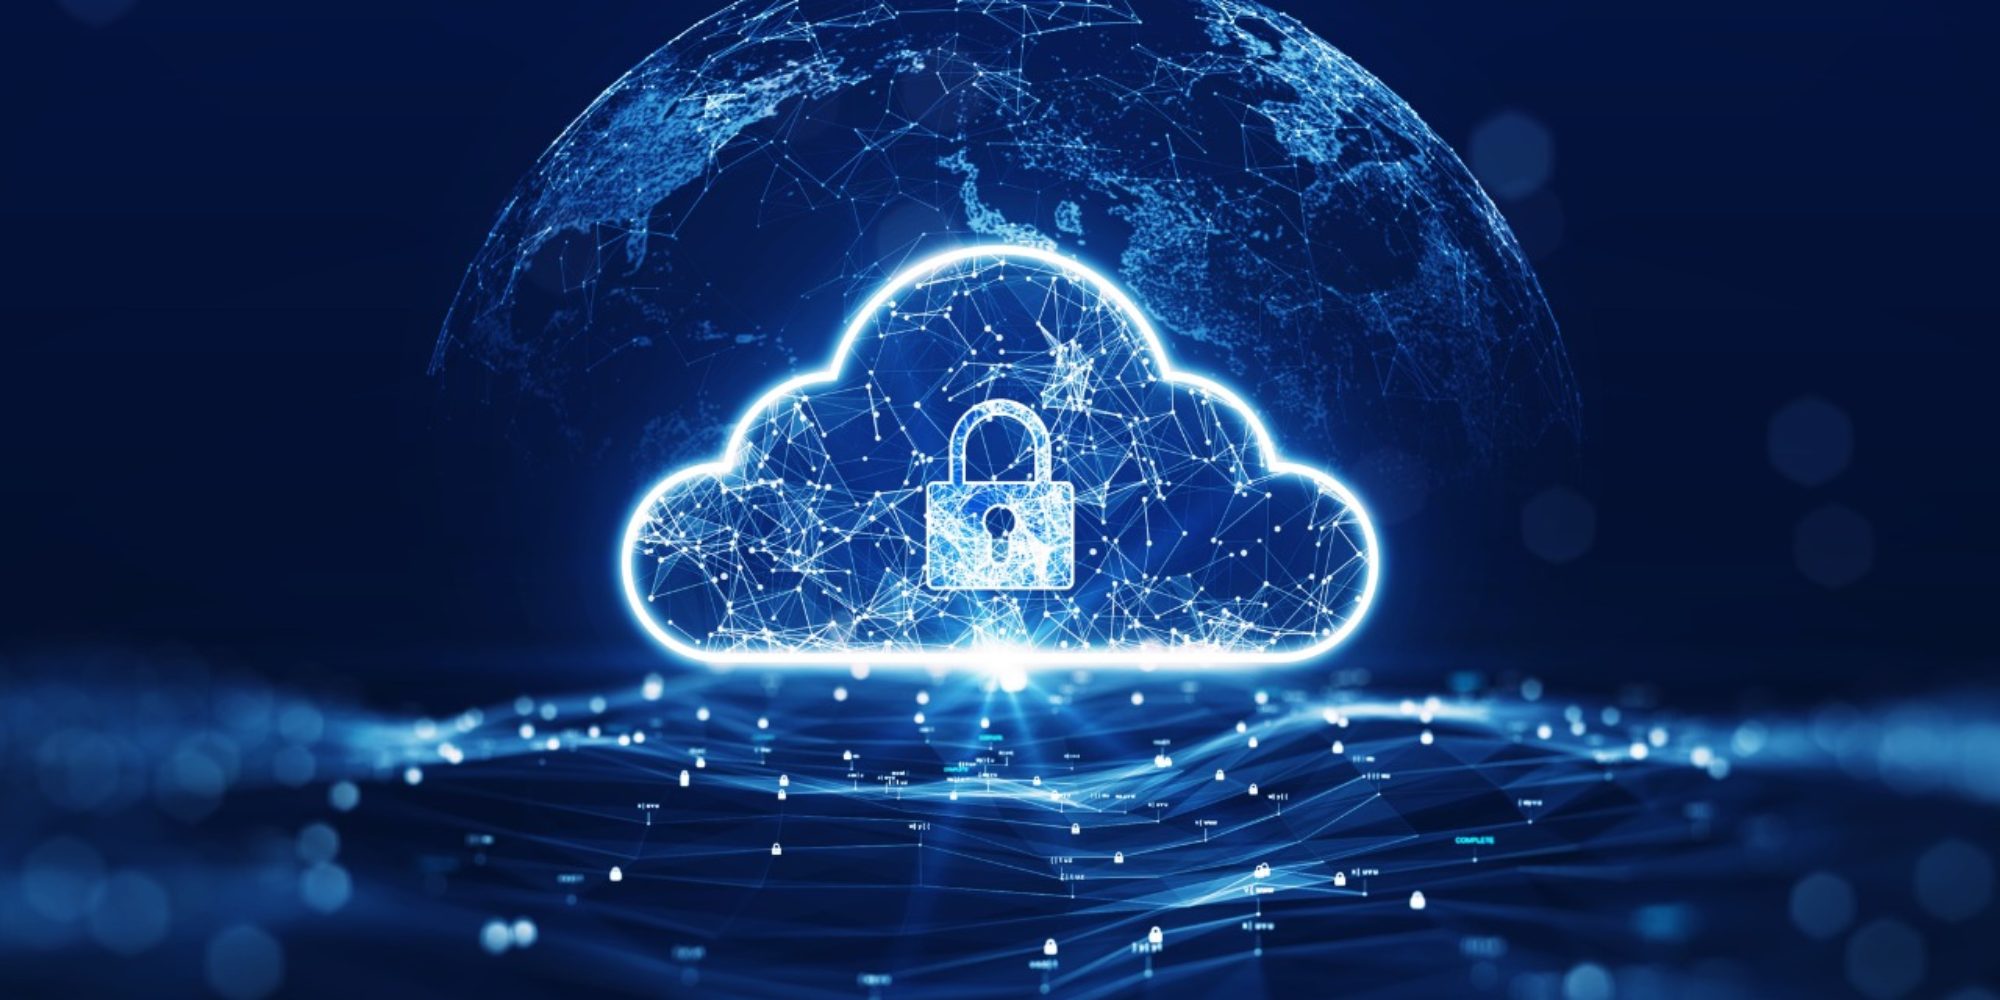 What Is Advanced Data Protection for iCloud? Should You Enable It?